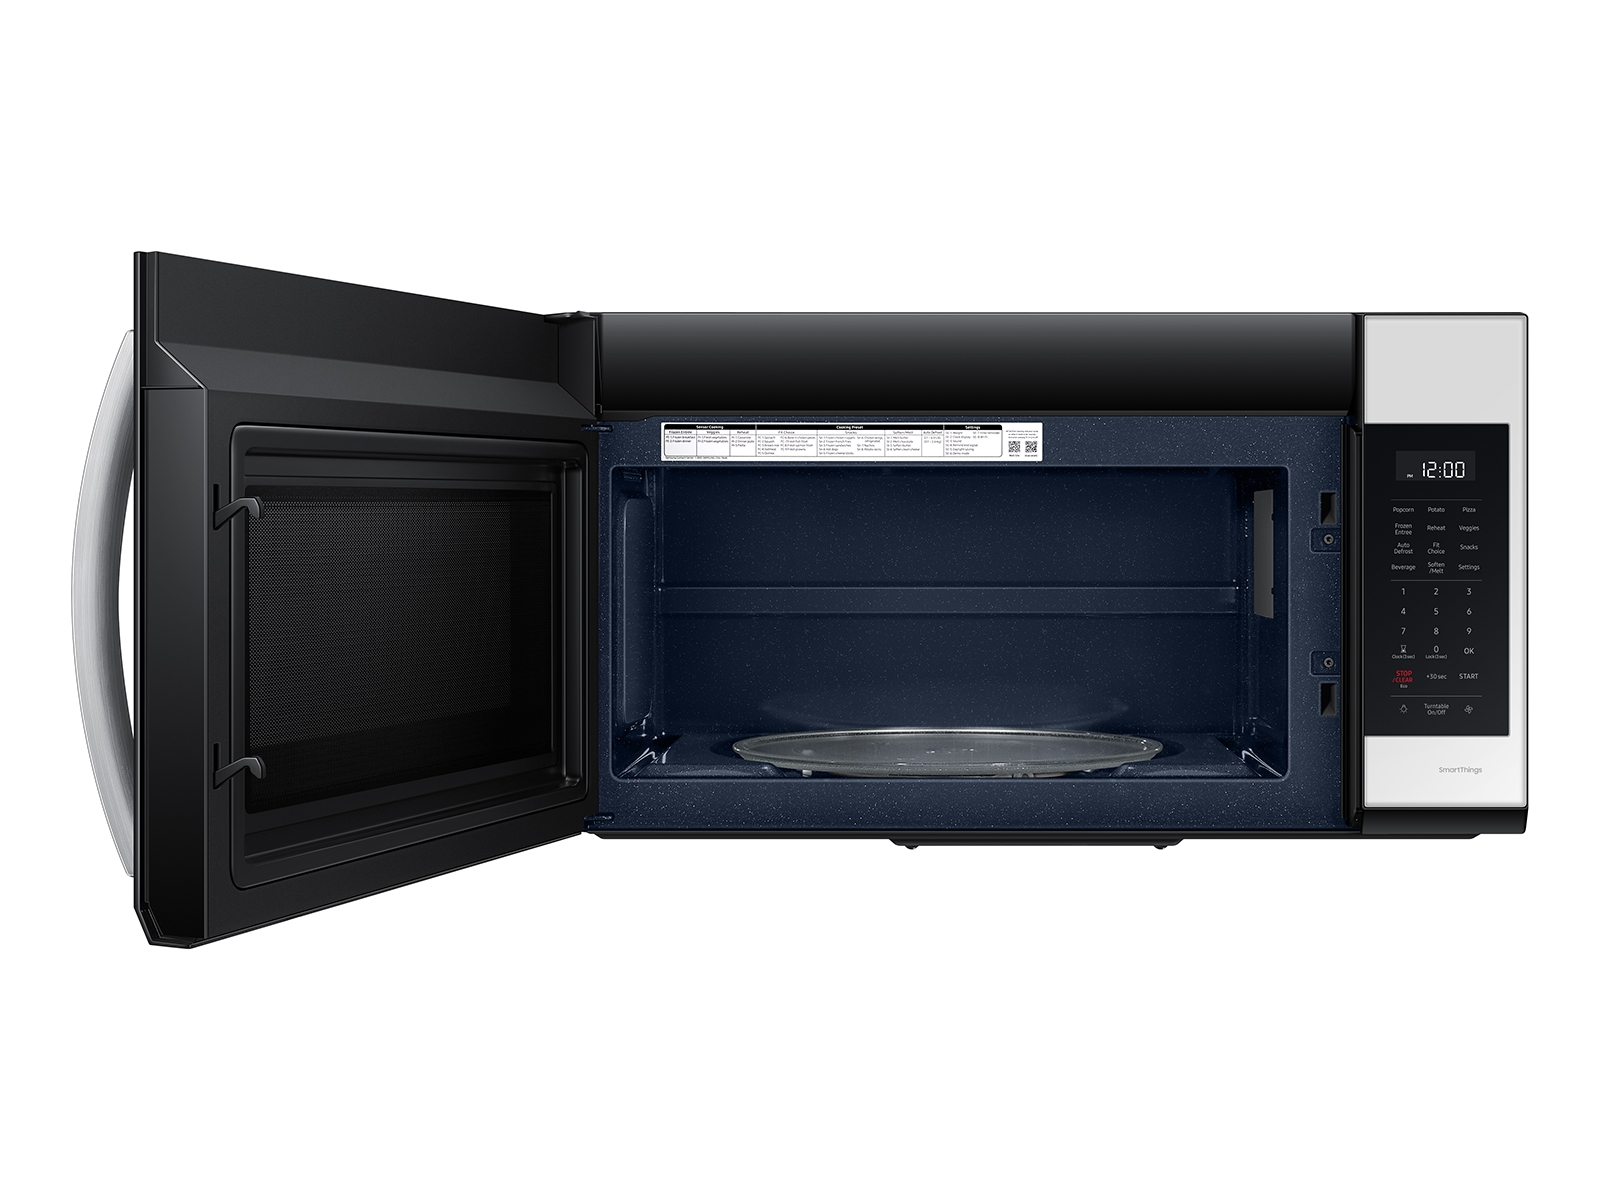 Thumbnail image of Bespoke Smart 1.9 cu. ft. Over-the-Range Microwave with Sensor Cook in White Glass